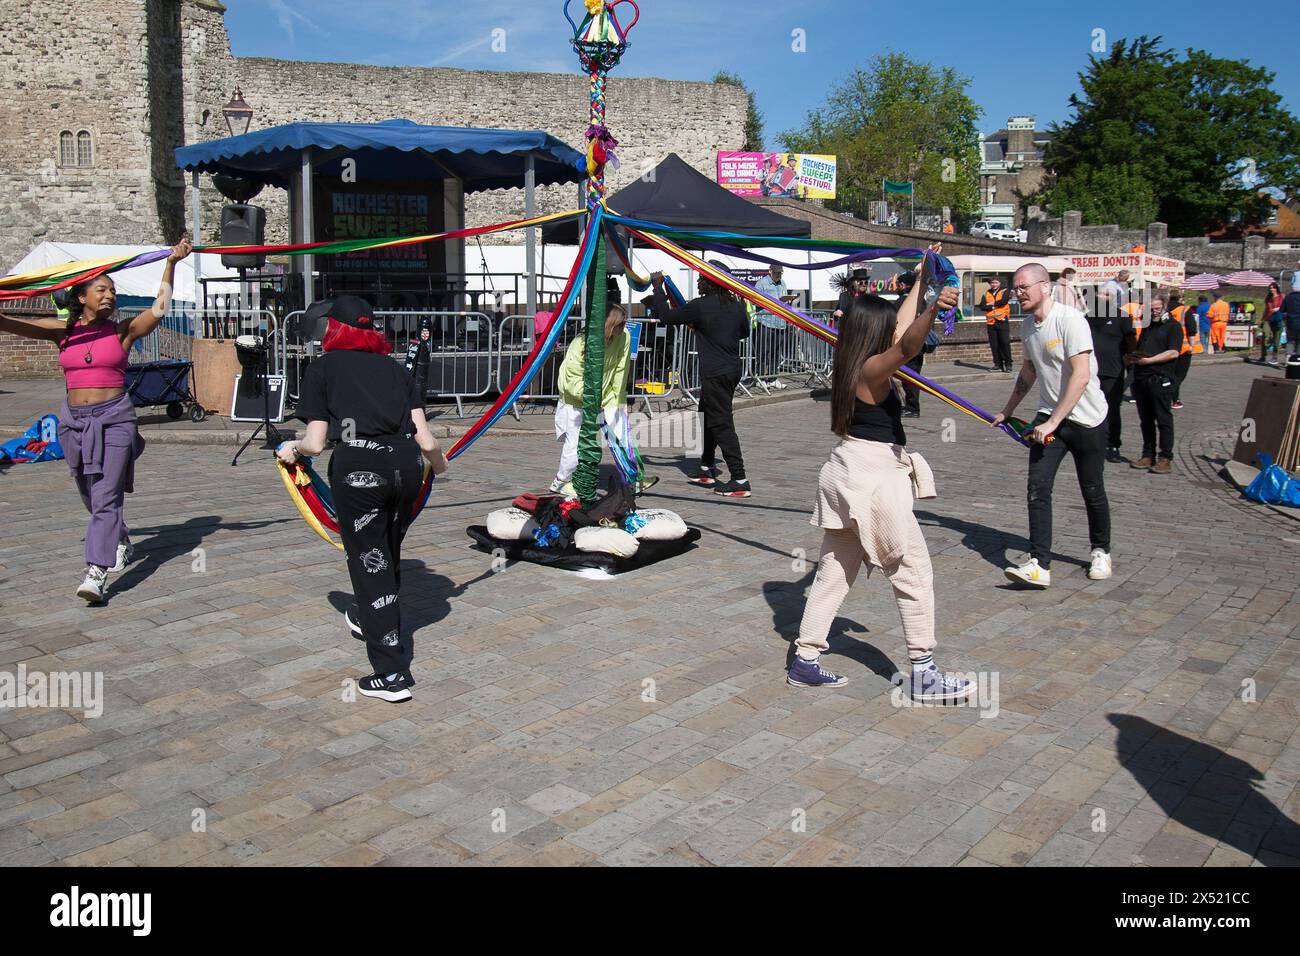 Folkdance Remixed Sweeps Festival Rochester Kent Banque D'Images